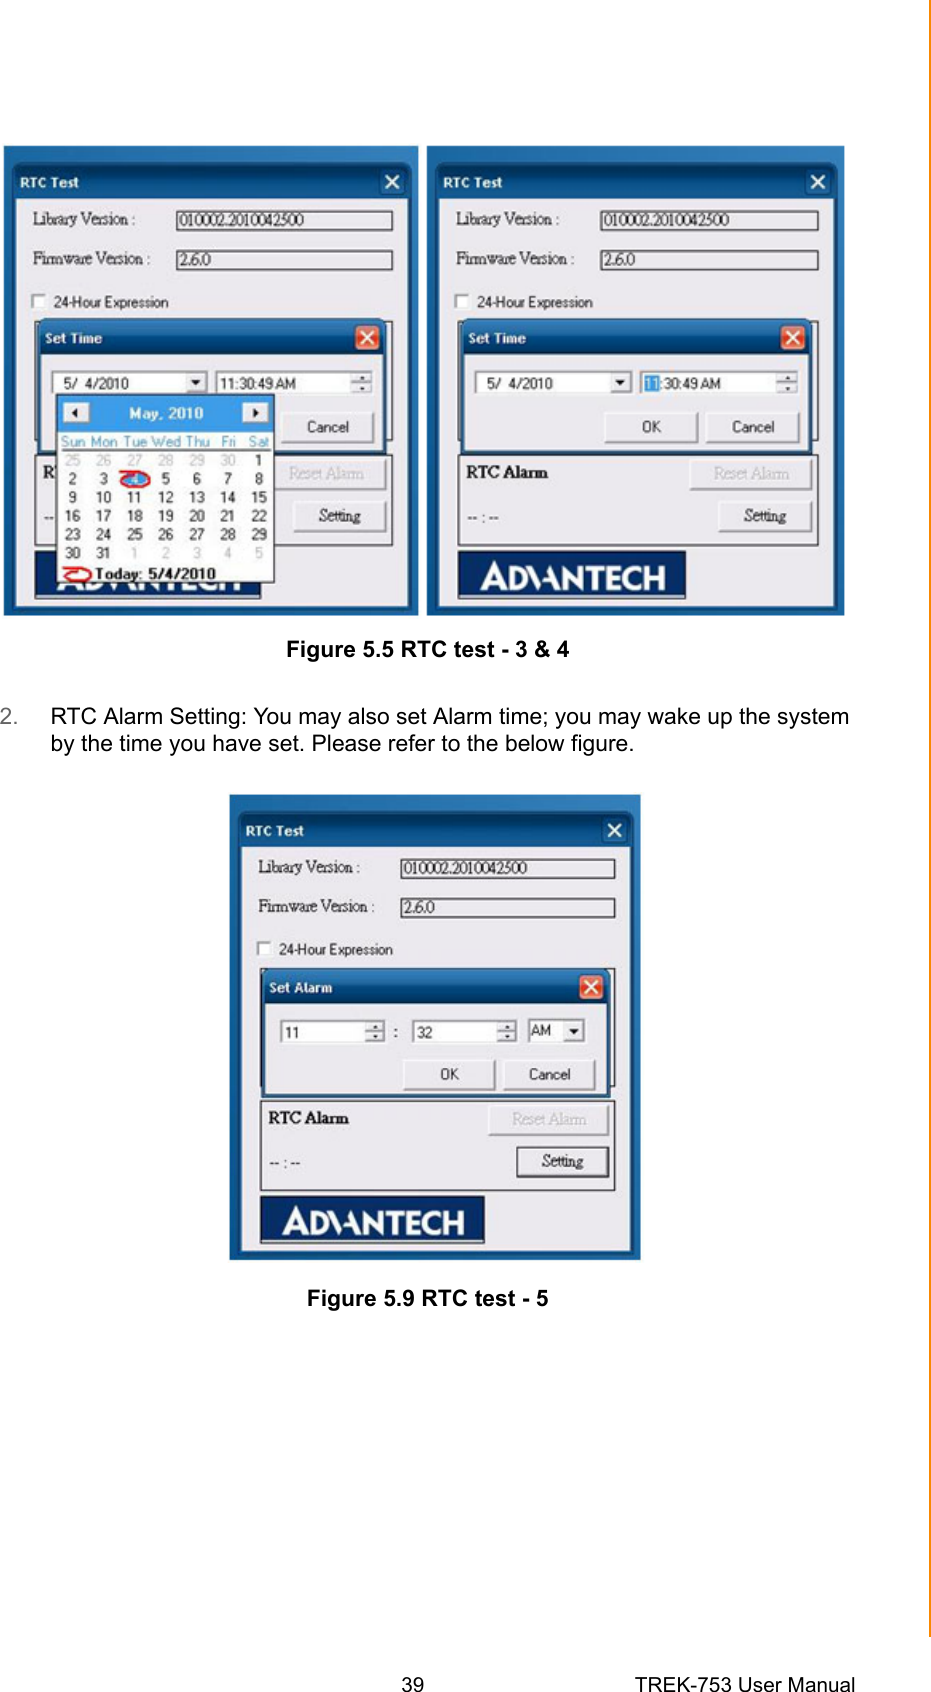 39 TREK-753 User ManualChapter 5 Software Demo Utility SetupFigure 5.5 RTC test - 3 &amp; 42. RTC Alarm Setting: You may also set Alarm time; you may wake up the system by the time you have set. Please refer to the below figure.Figure 5.9 RTC test - 5